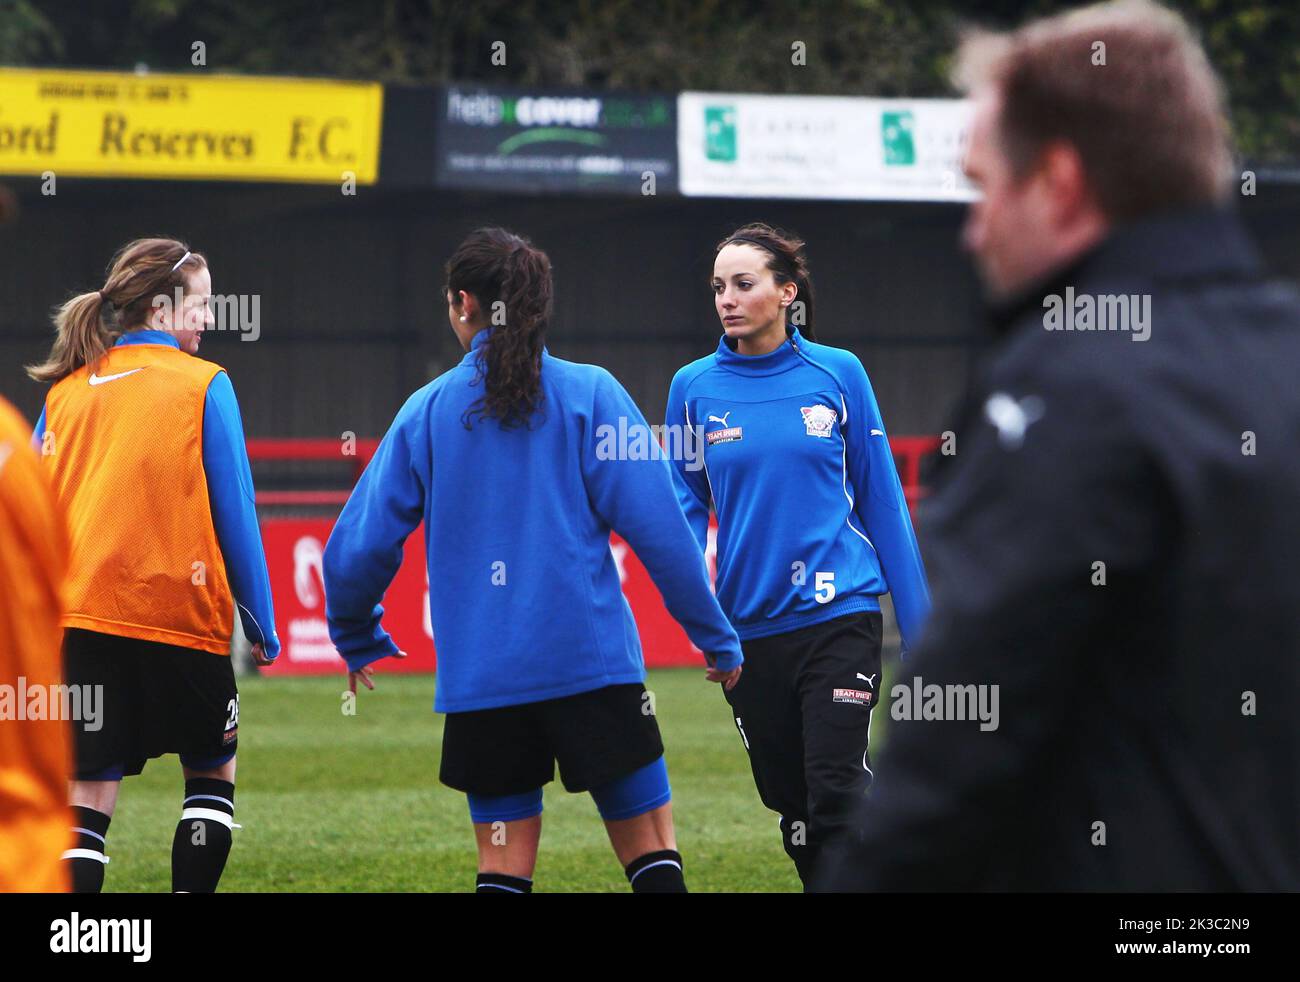 The day before the Champions League quarterfinals, Arsenal vs. Linköping football club. Linköping FC took the lead in the Champions League quarter-final against Arsenal at Meadow Park outside London, UK. In ther picture: Linköping football club is training and preparing for tomorrow's match. In the picture: Linköping no 5 Kosovare Asllani. Stock Photo